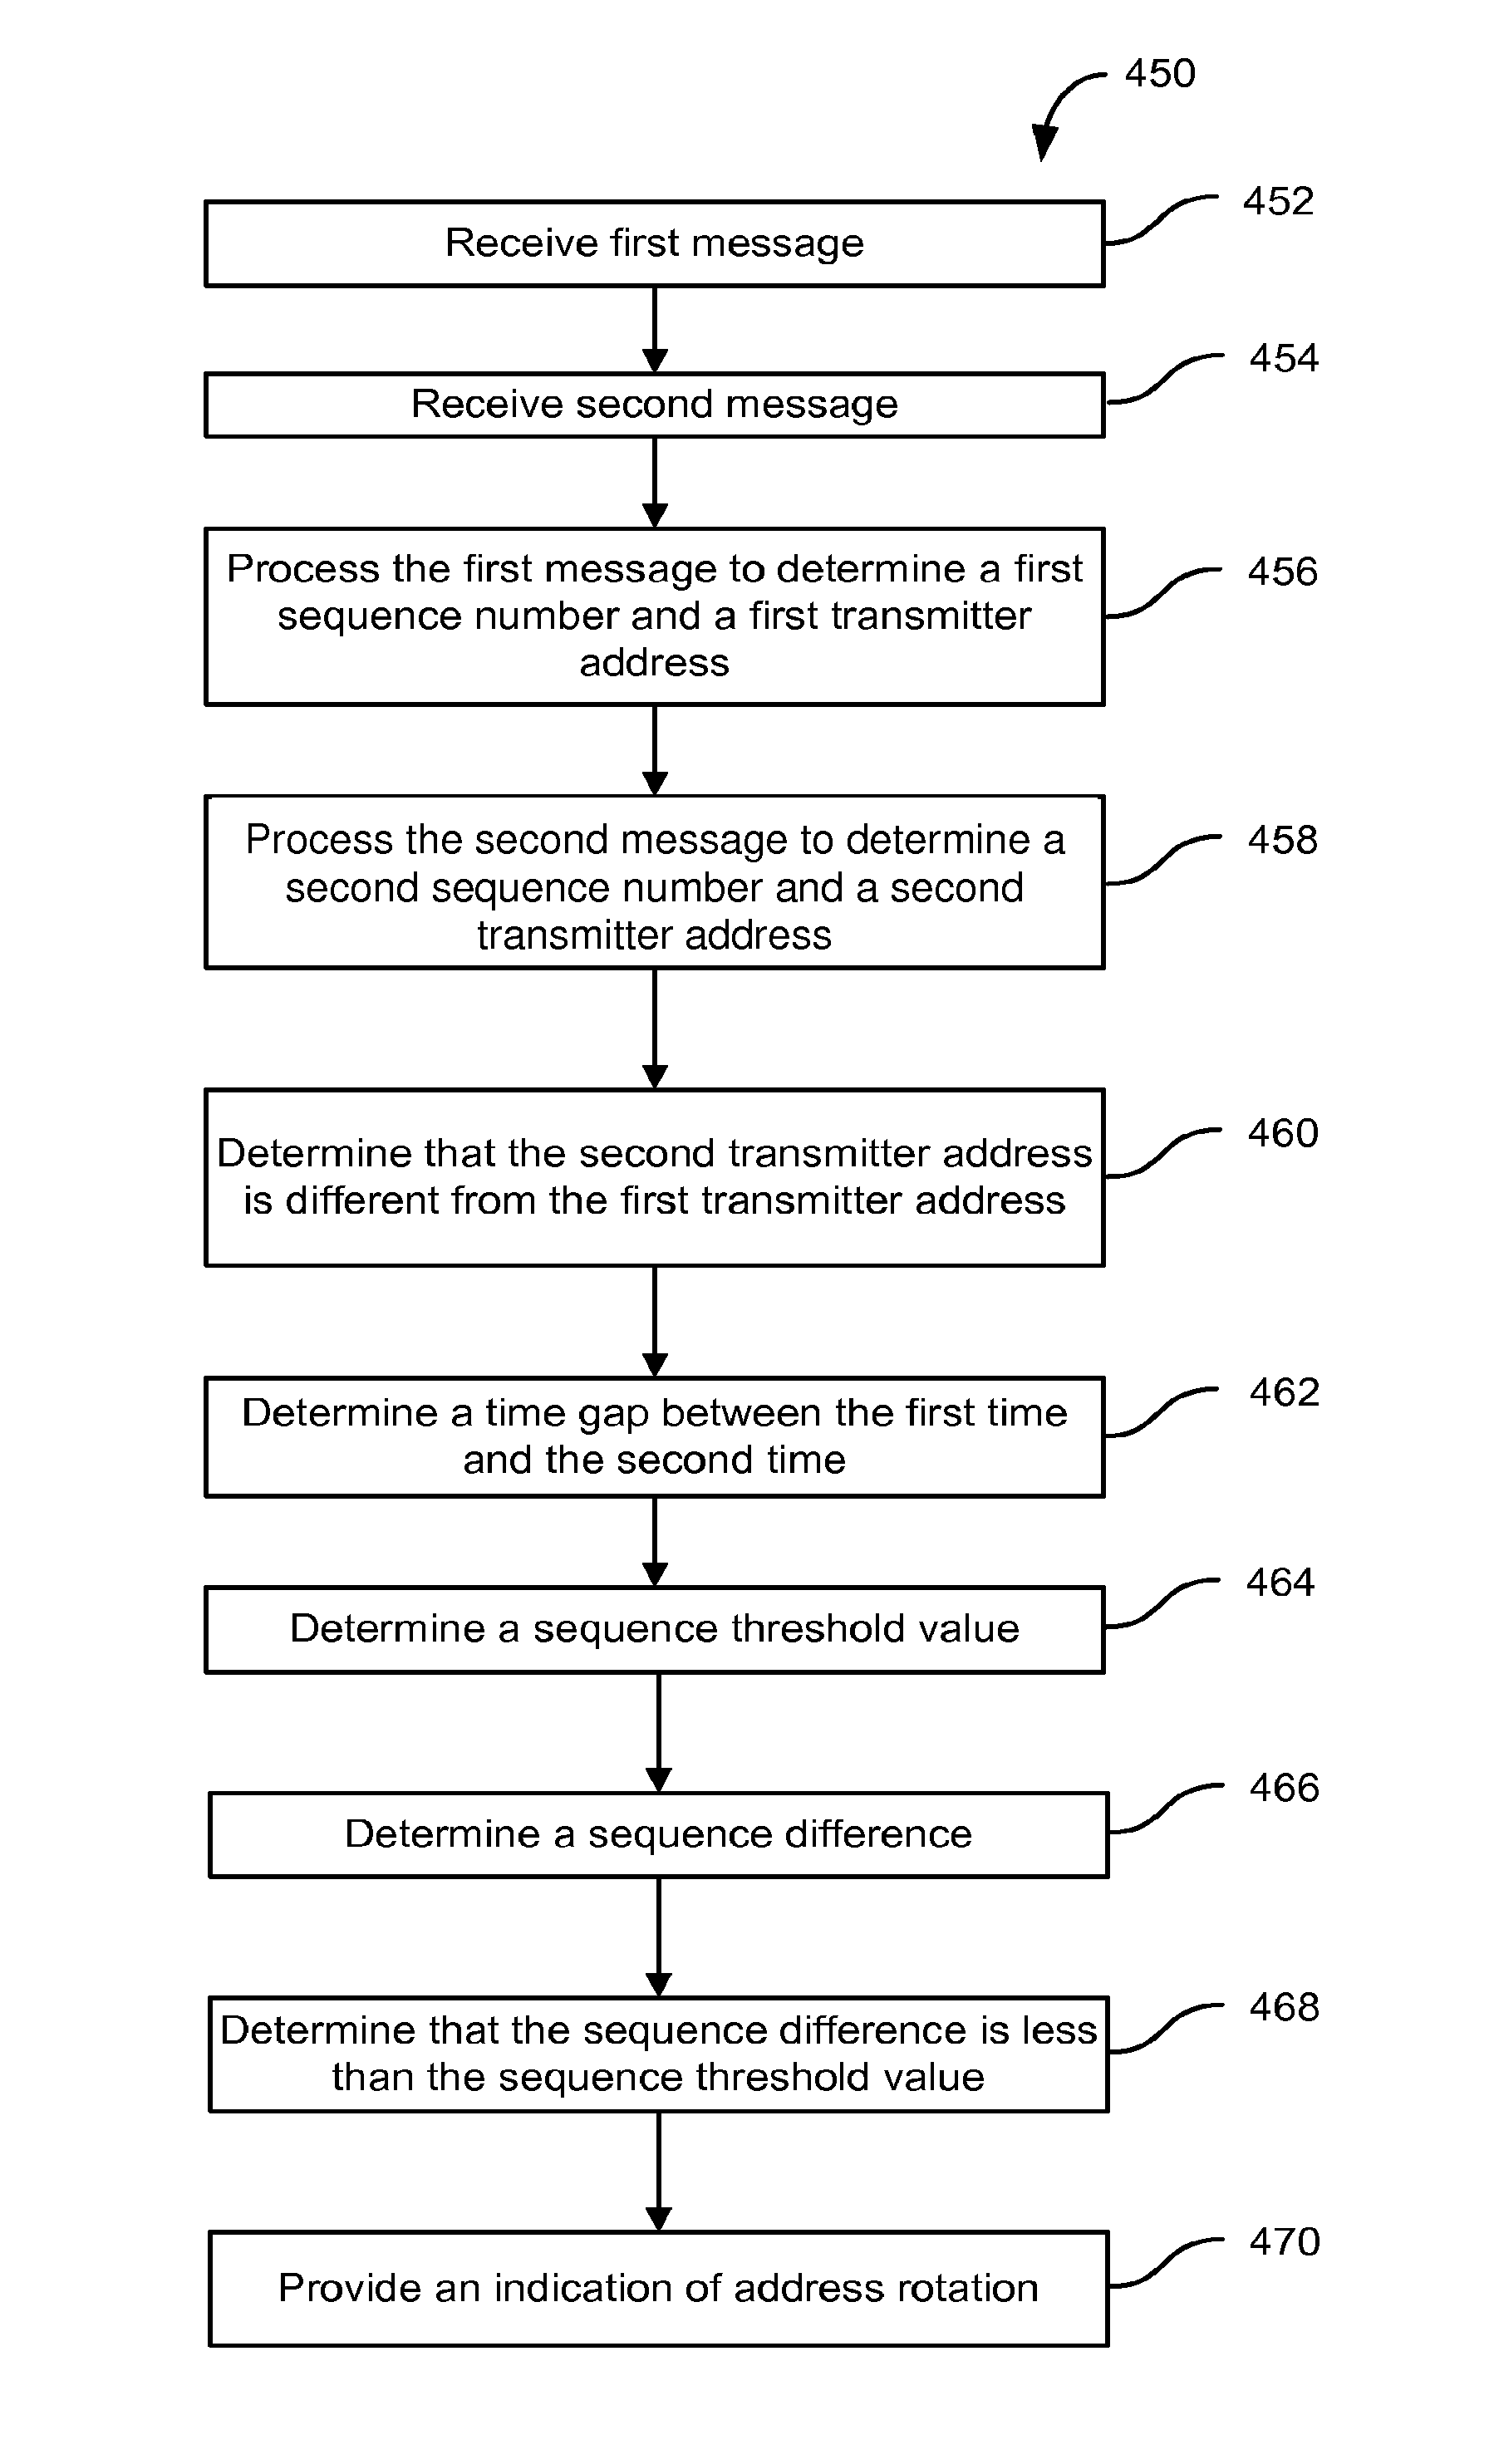 Method and system for detecting address rotation and related events in communication networks